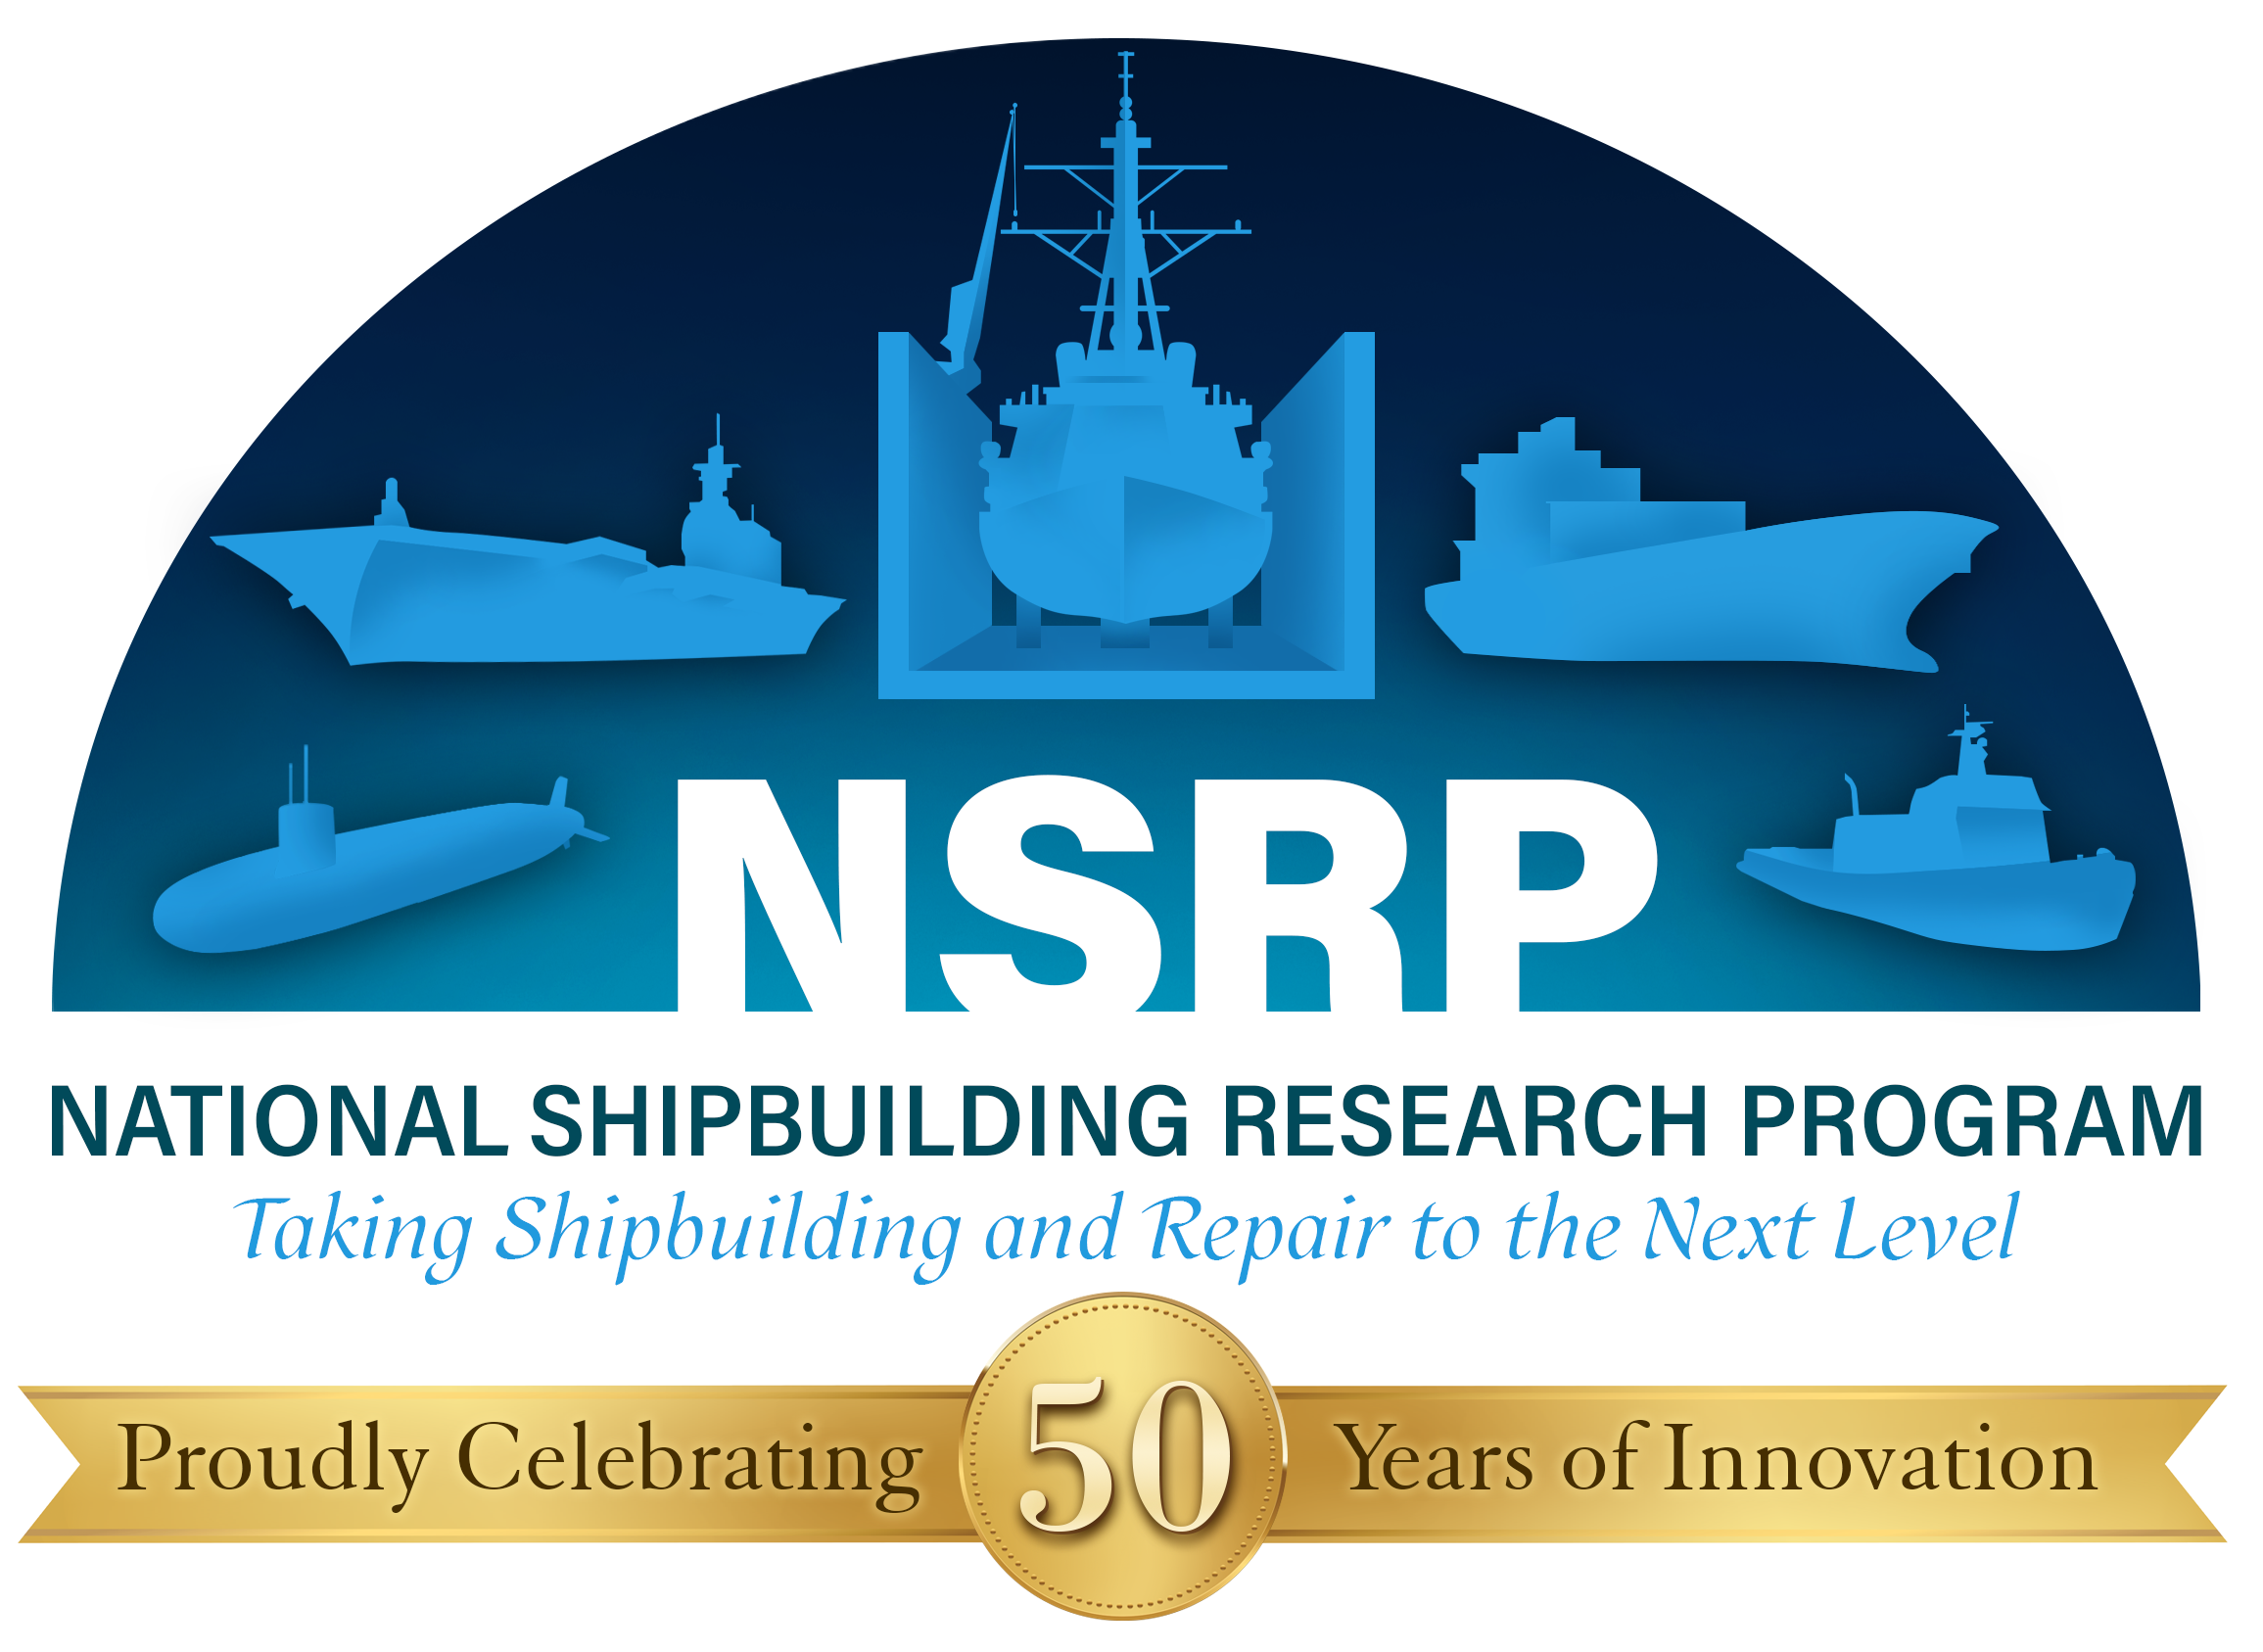 National Shipbuilding Research Program - 50 Years of Innovation